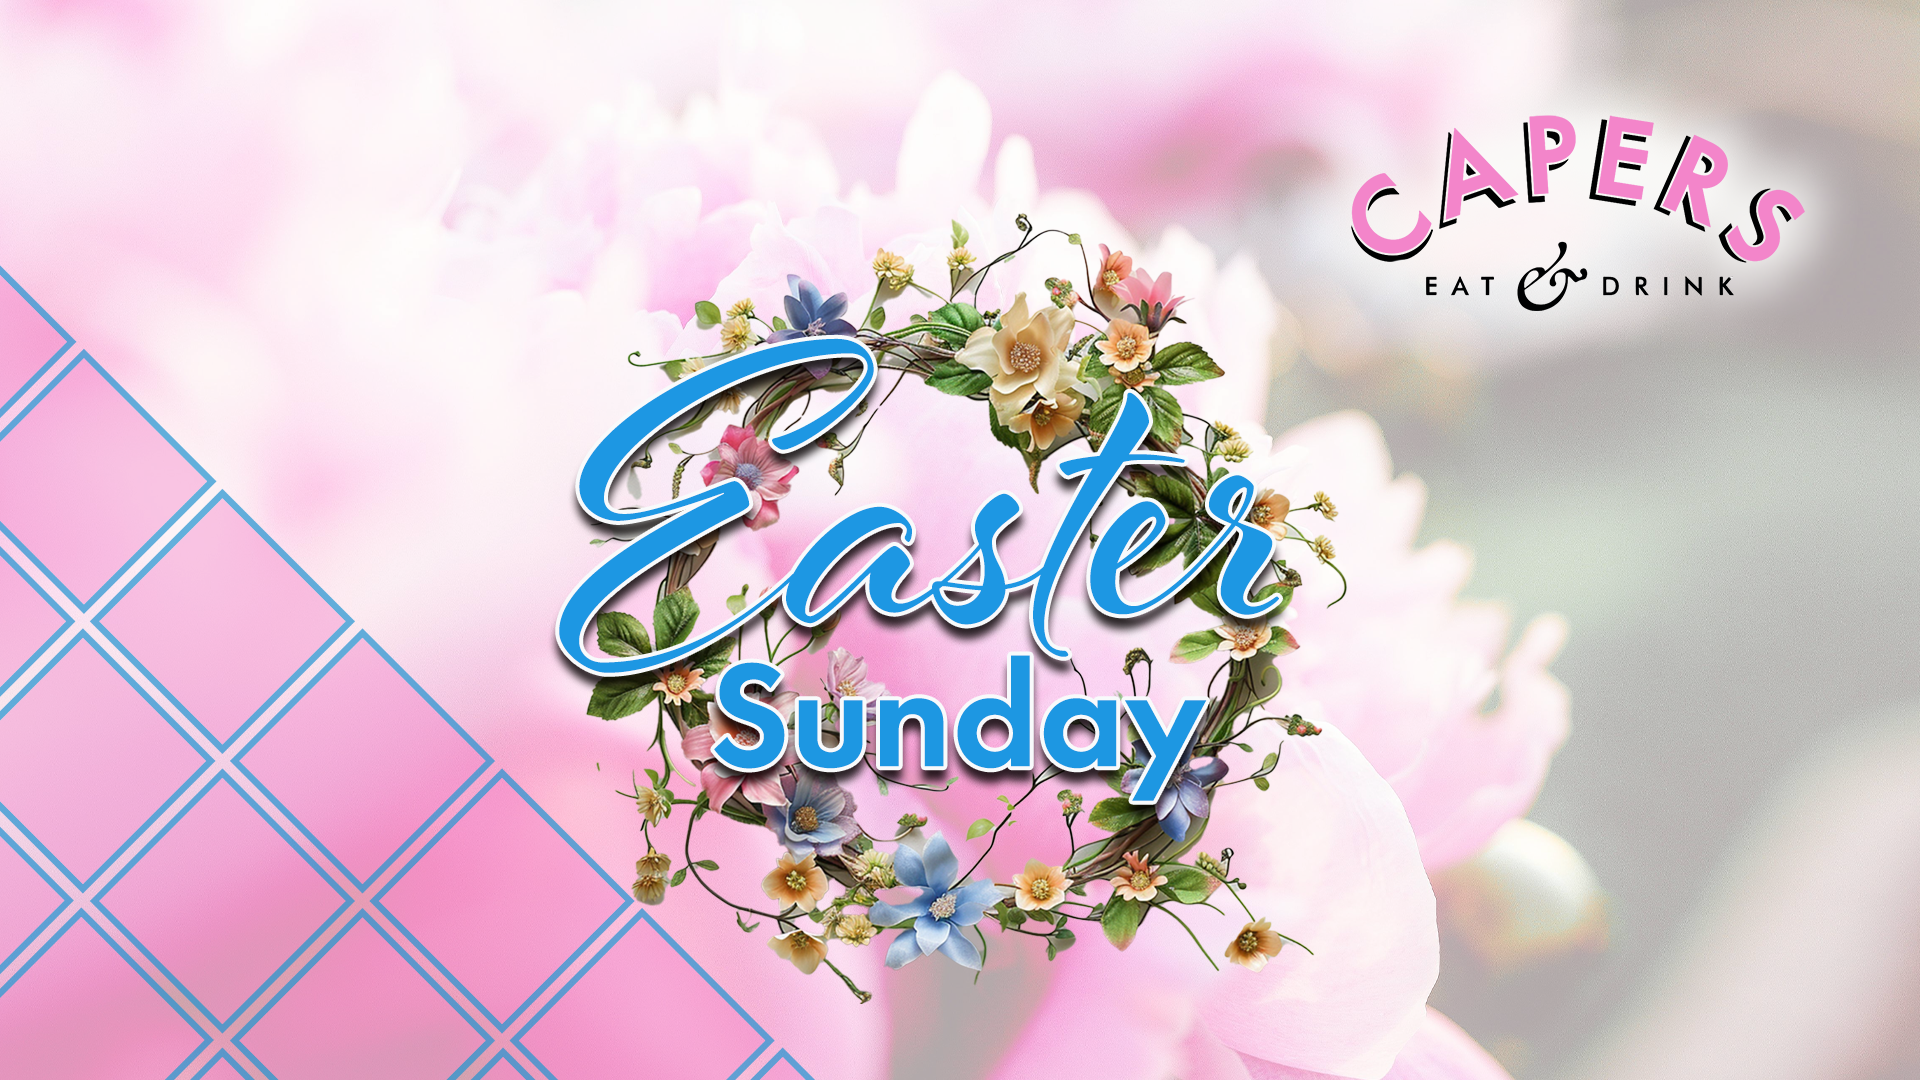 Easter Sunday at Capers